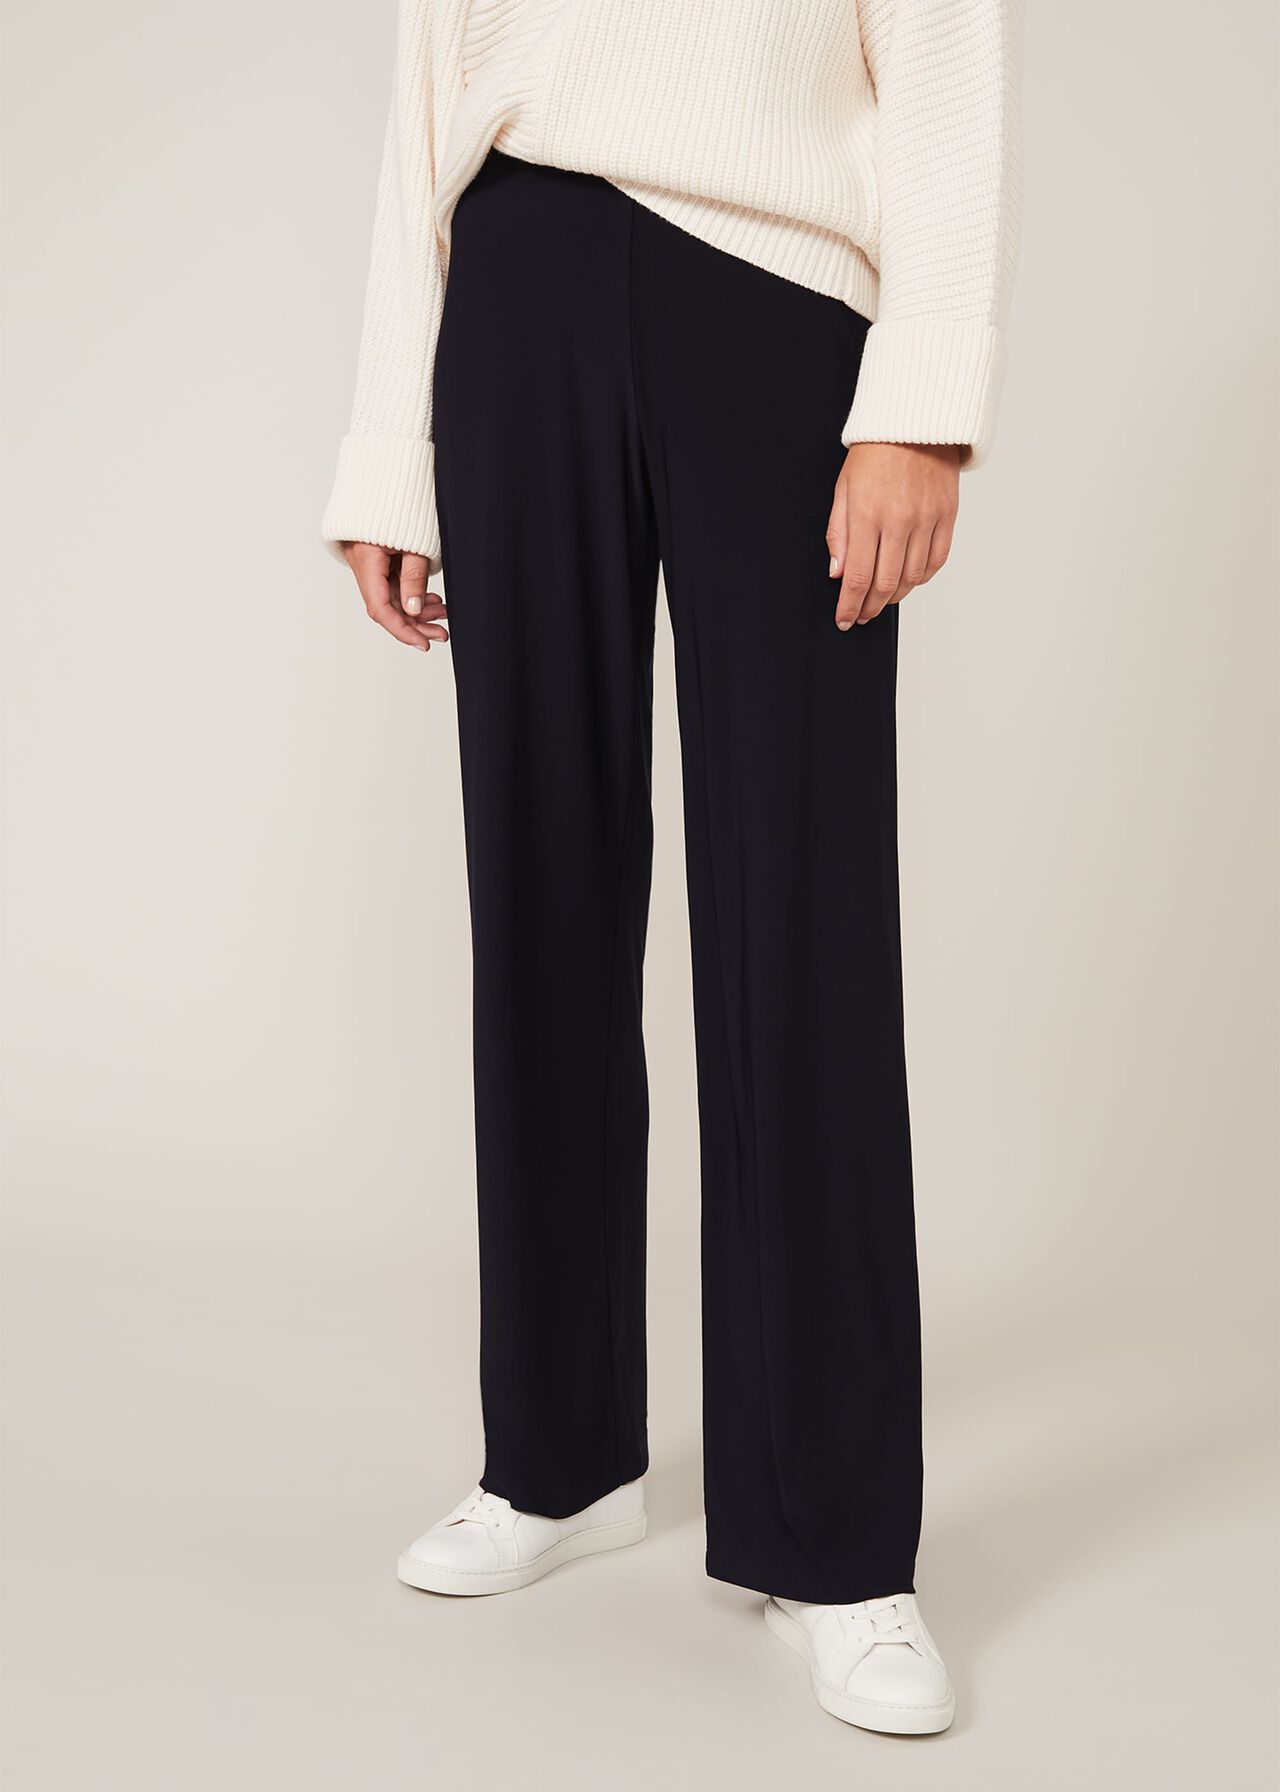 Corinne Jersey Trousers | Phase Eight